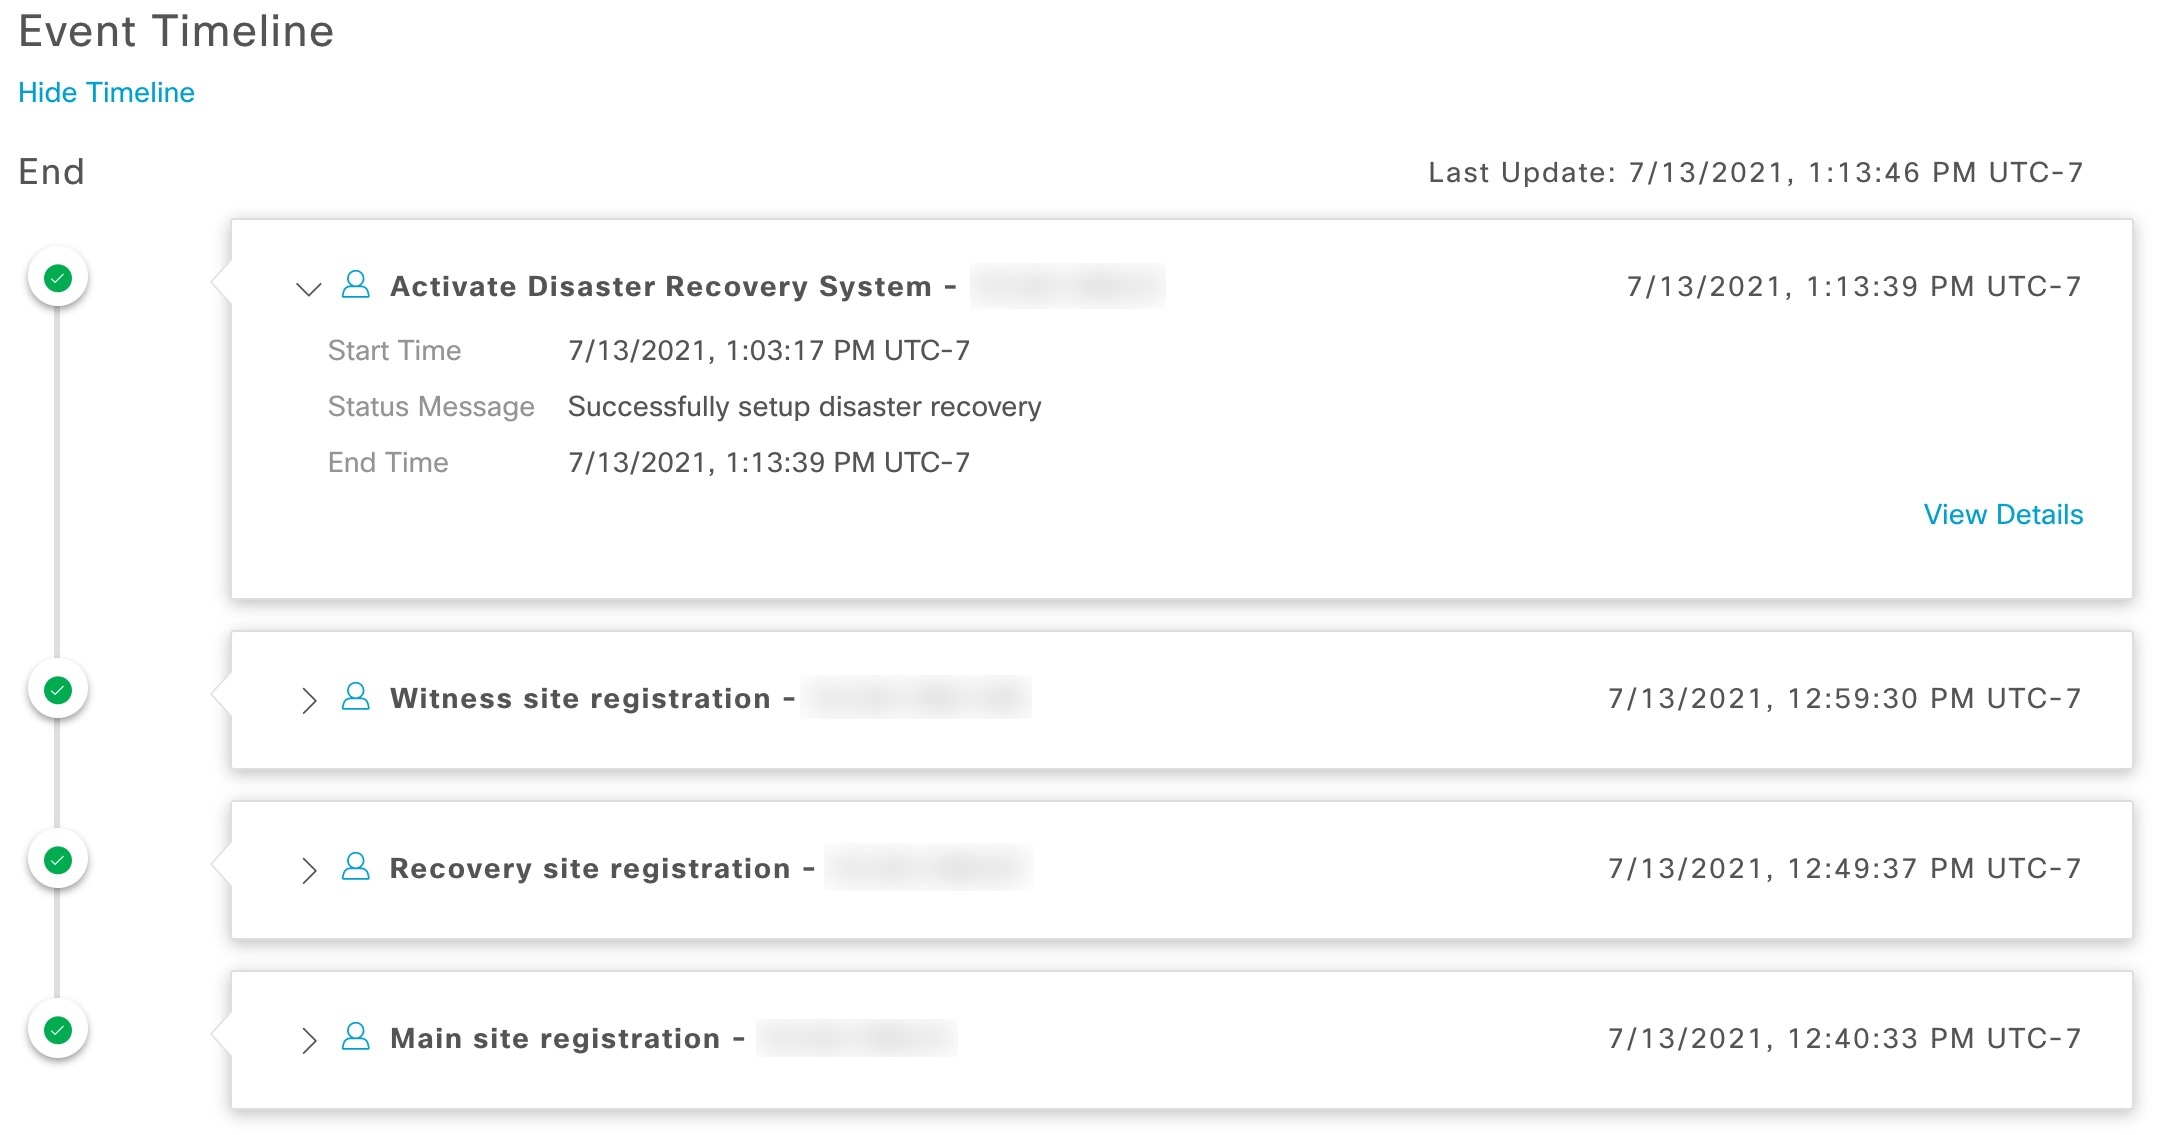 The Event Timeline displays the activate disaster recovery system details.